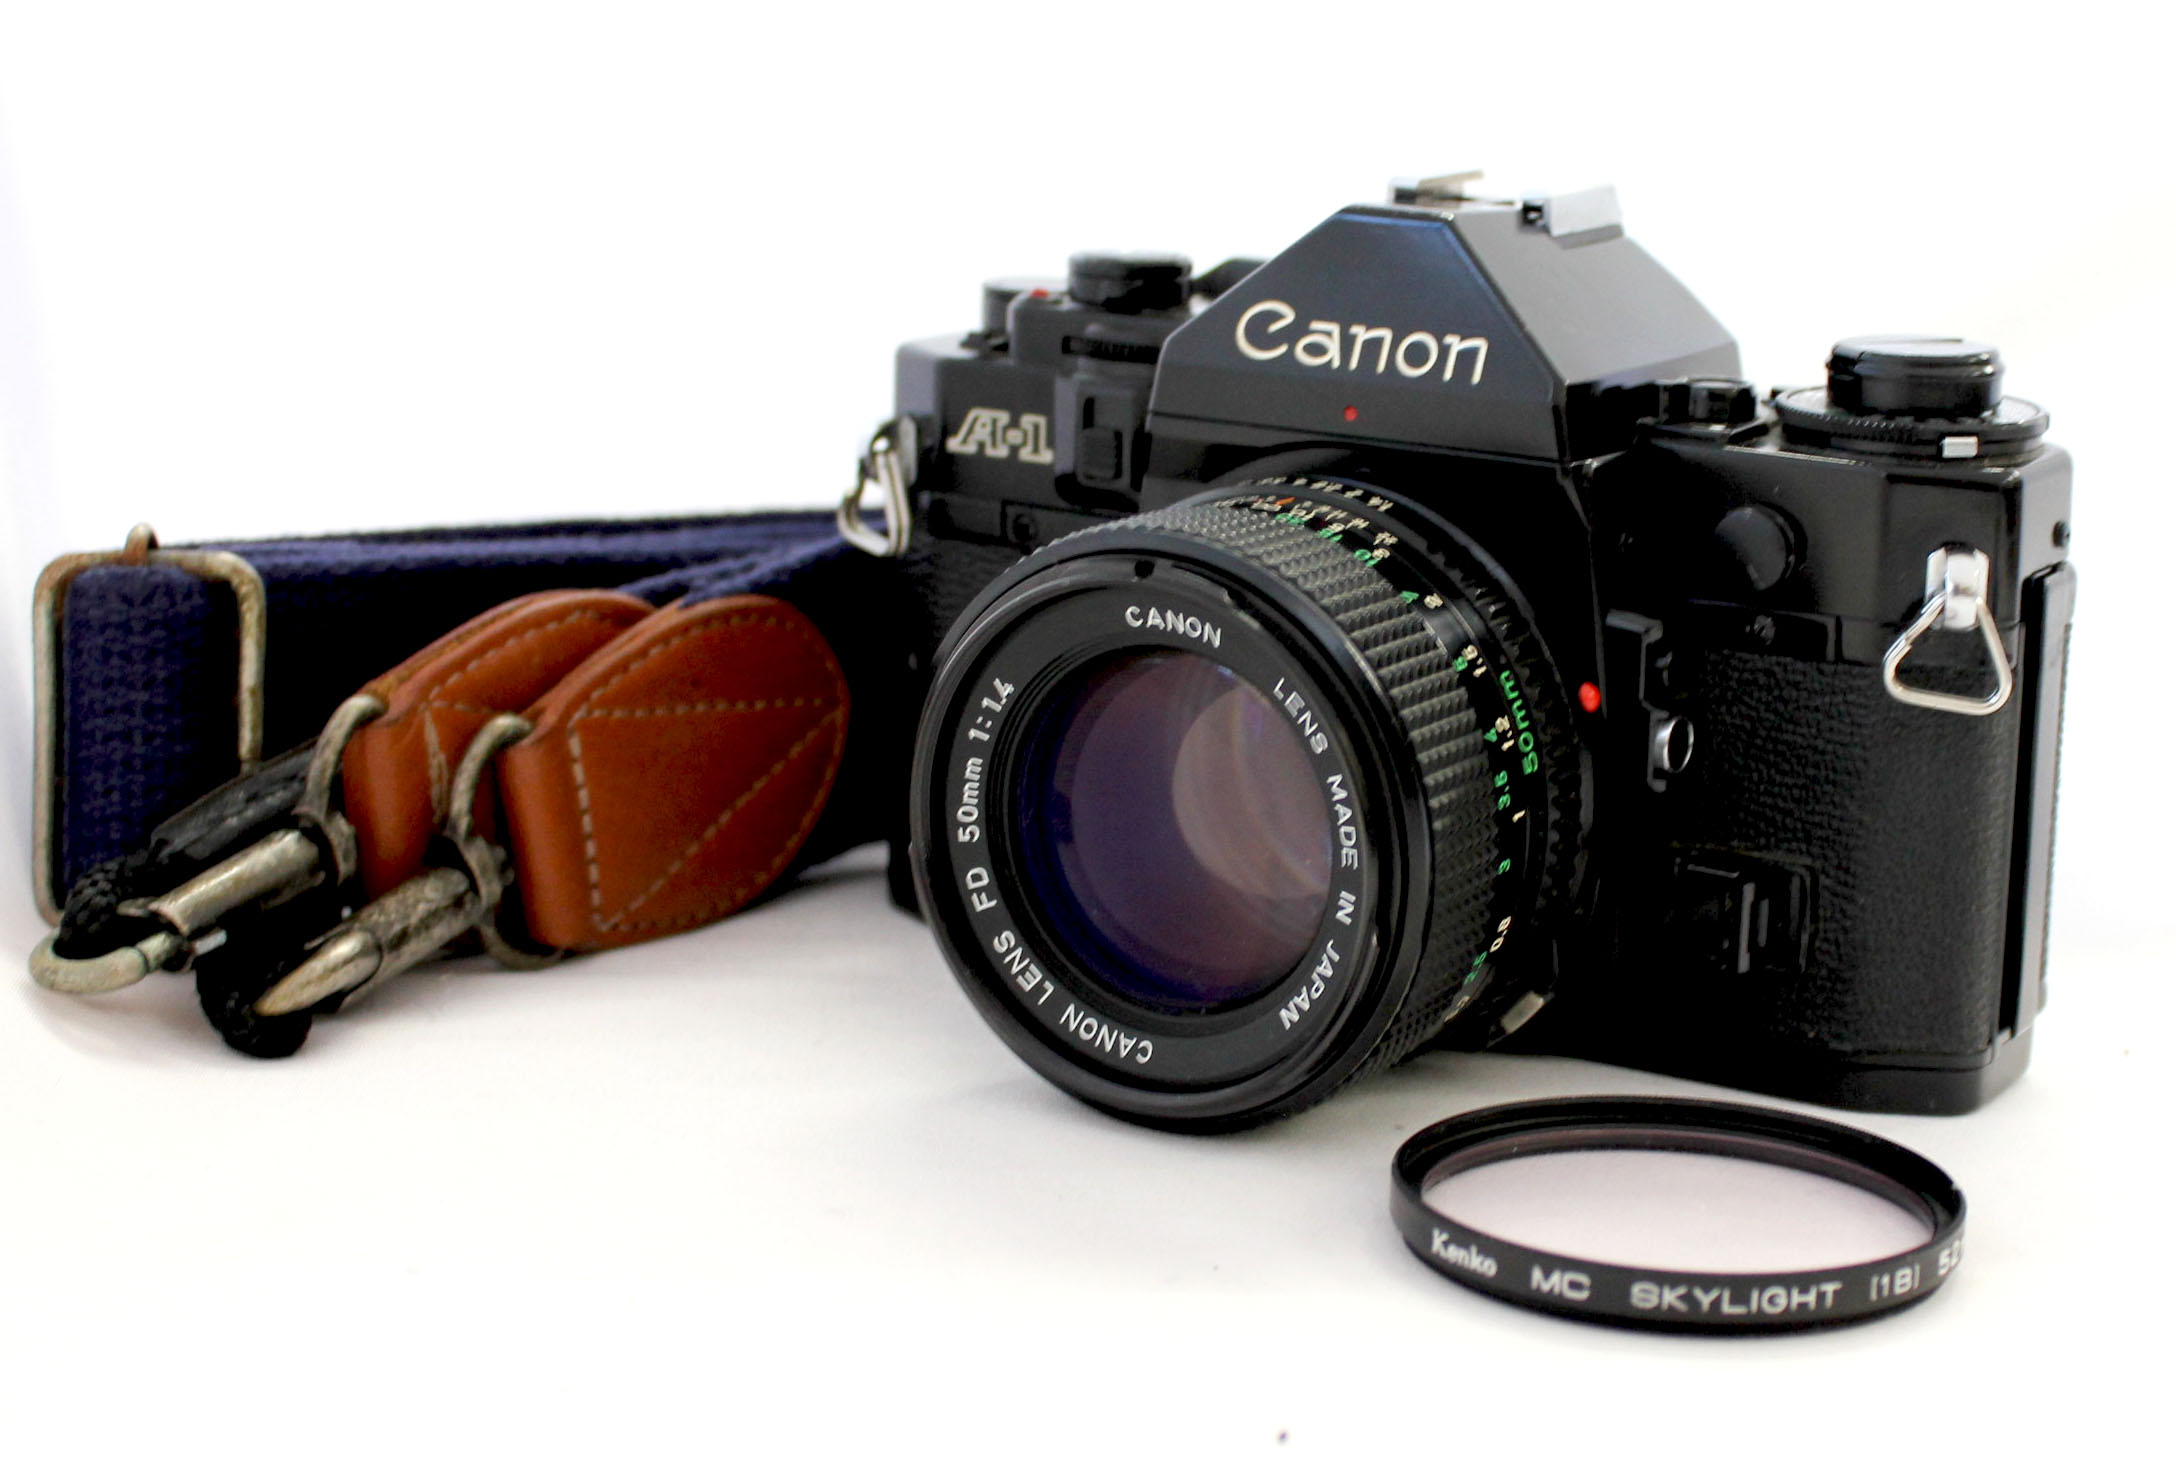 Japan Used Camera Shop | Canon A-1 35mm SLR Film Camera with New FD NFD 50mm F/1.4 Lens from Japan